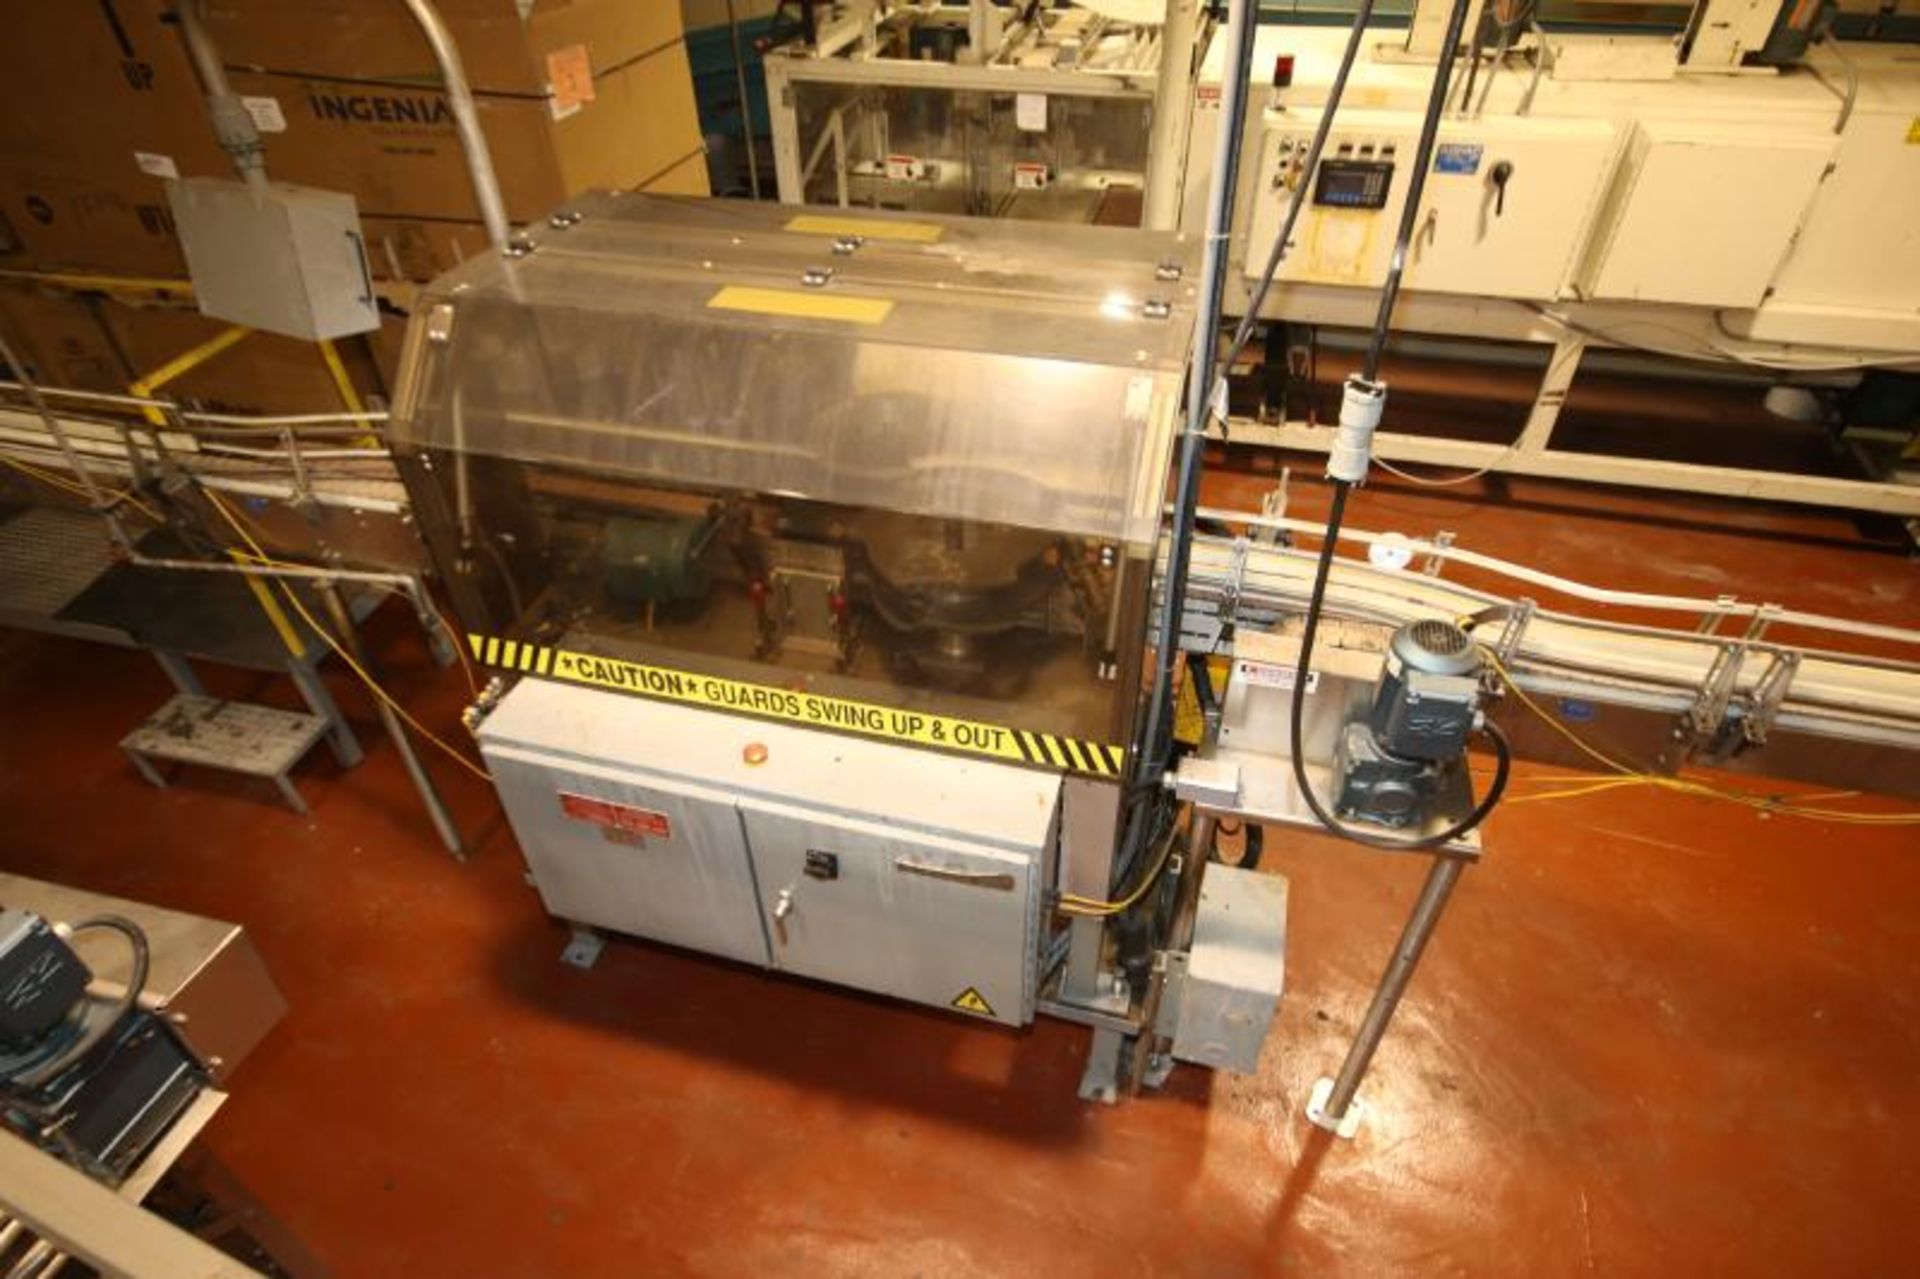 Trine In-Line Labeler, S/N 065M45036 with Slautterback Gluer, Change Parts & Mitsubishi Controls,